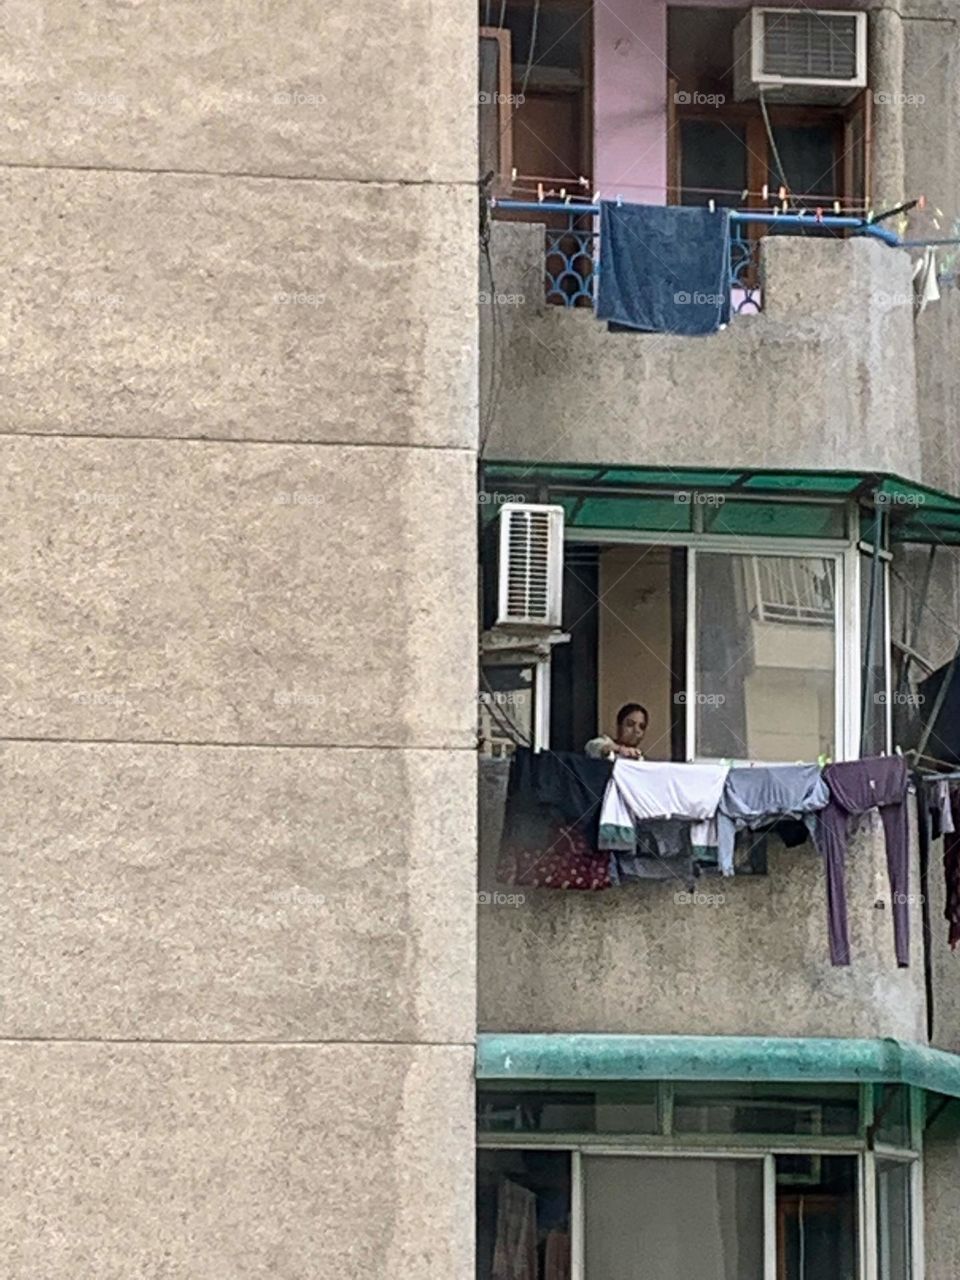 A house help hanging washed clothes for drying in the sun from the window of the balcony outside on the wire tied to the wall.